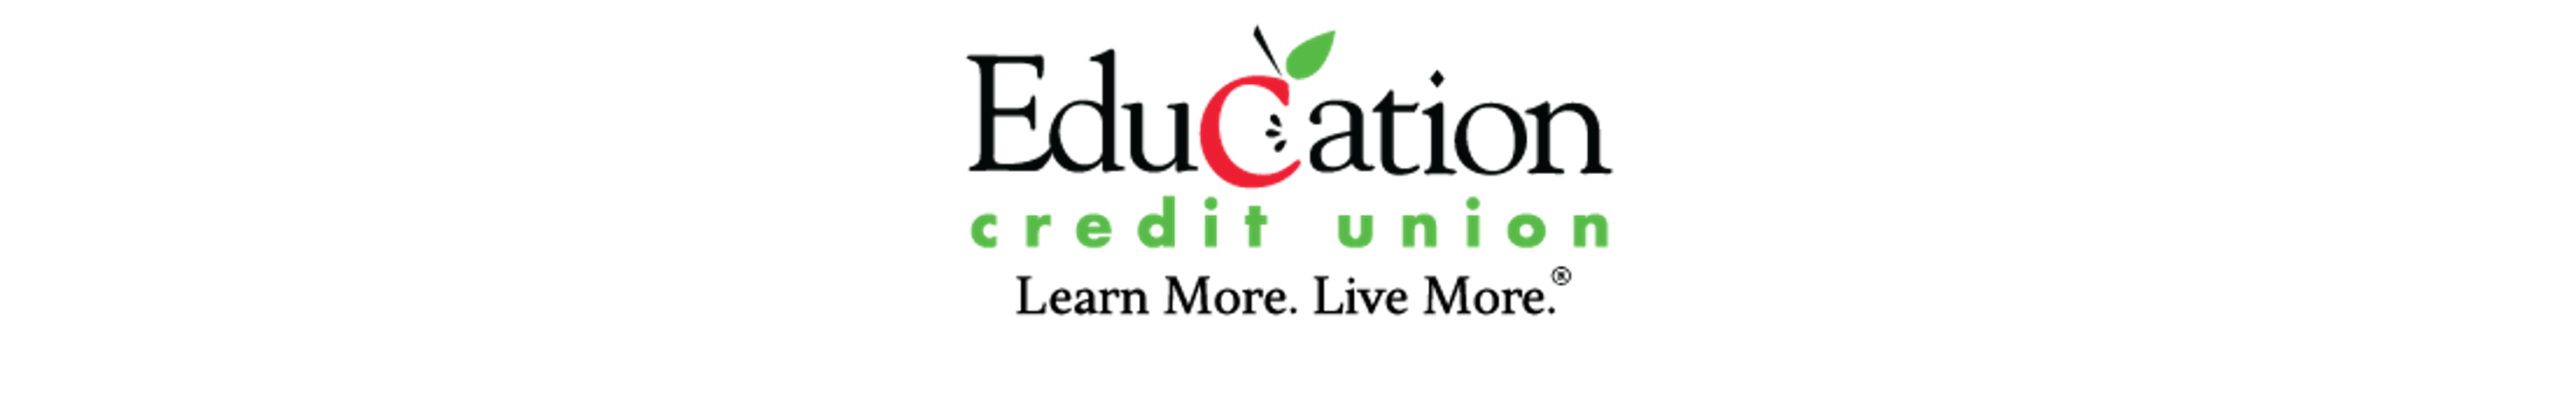 Education CU homepage – opens in a new window